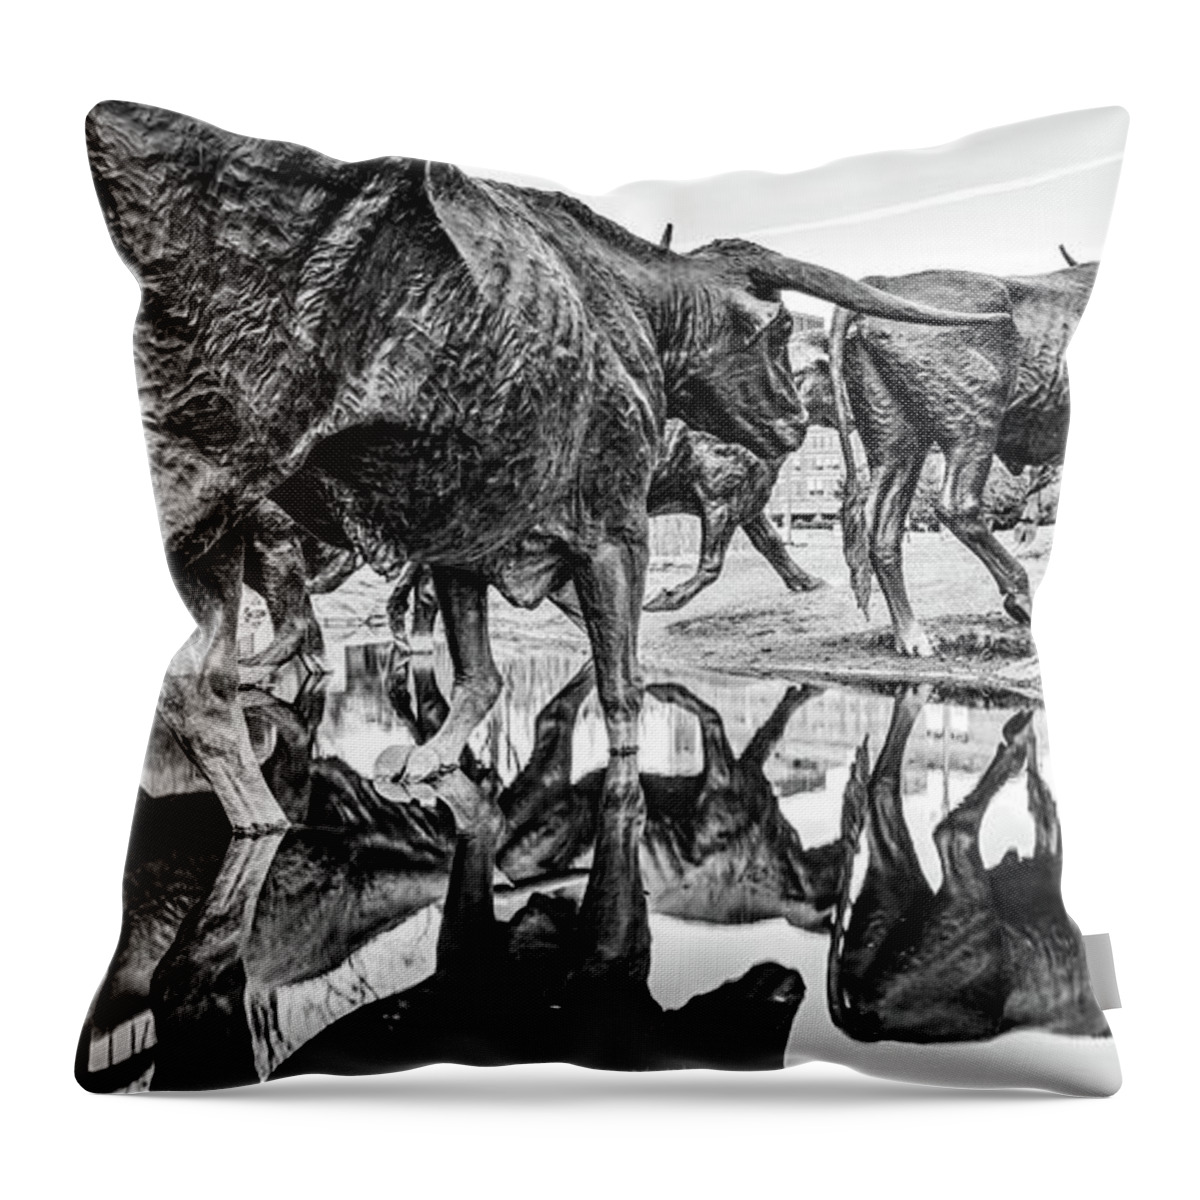 Dallas Skyline Throw Pillow featuring the photograph Where The Longhorns Gather - Dallas Texas BW Panorama by Gregory Ballos